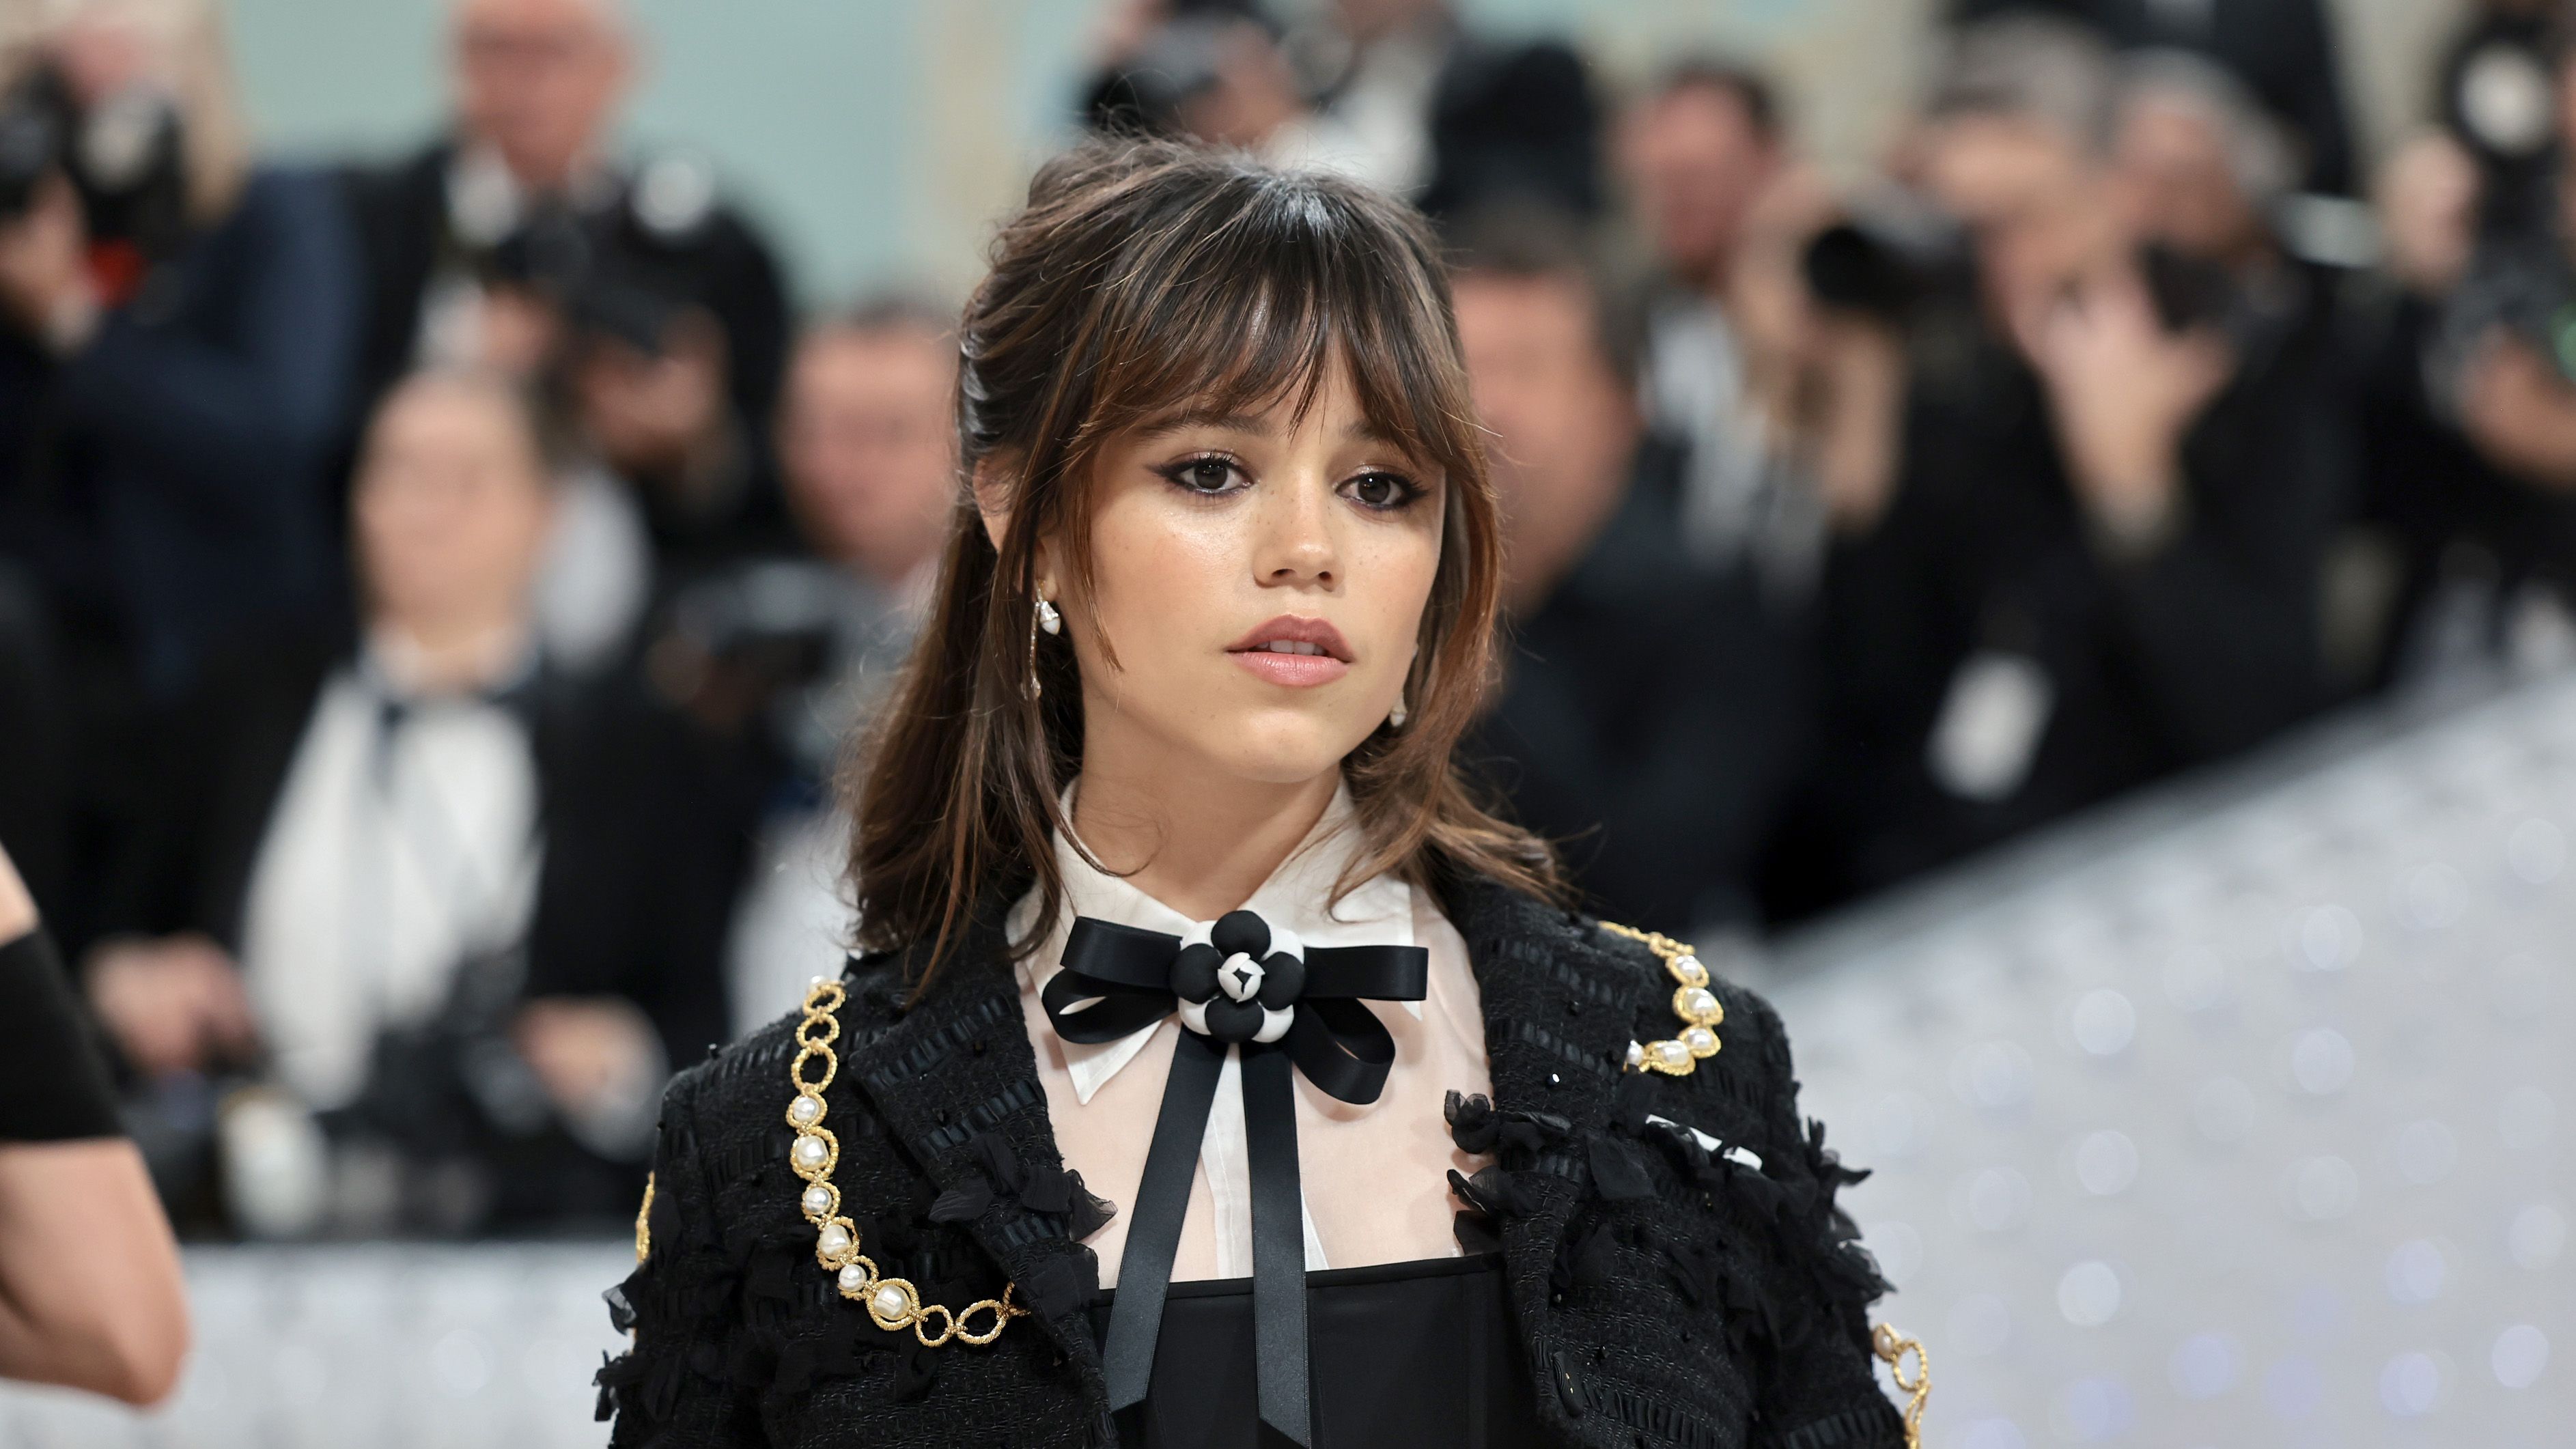 Wednesday Star Jenna Ortega Wore a Goth Sheer Dress and Corset